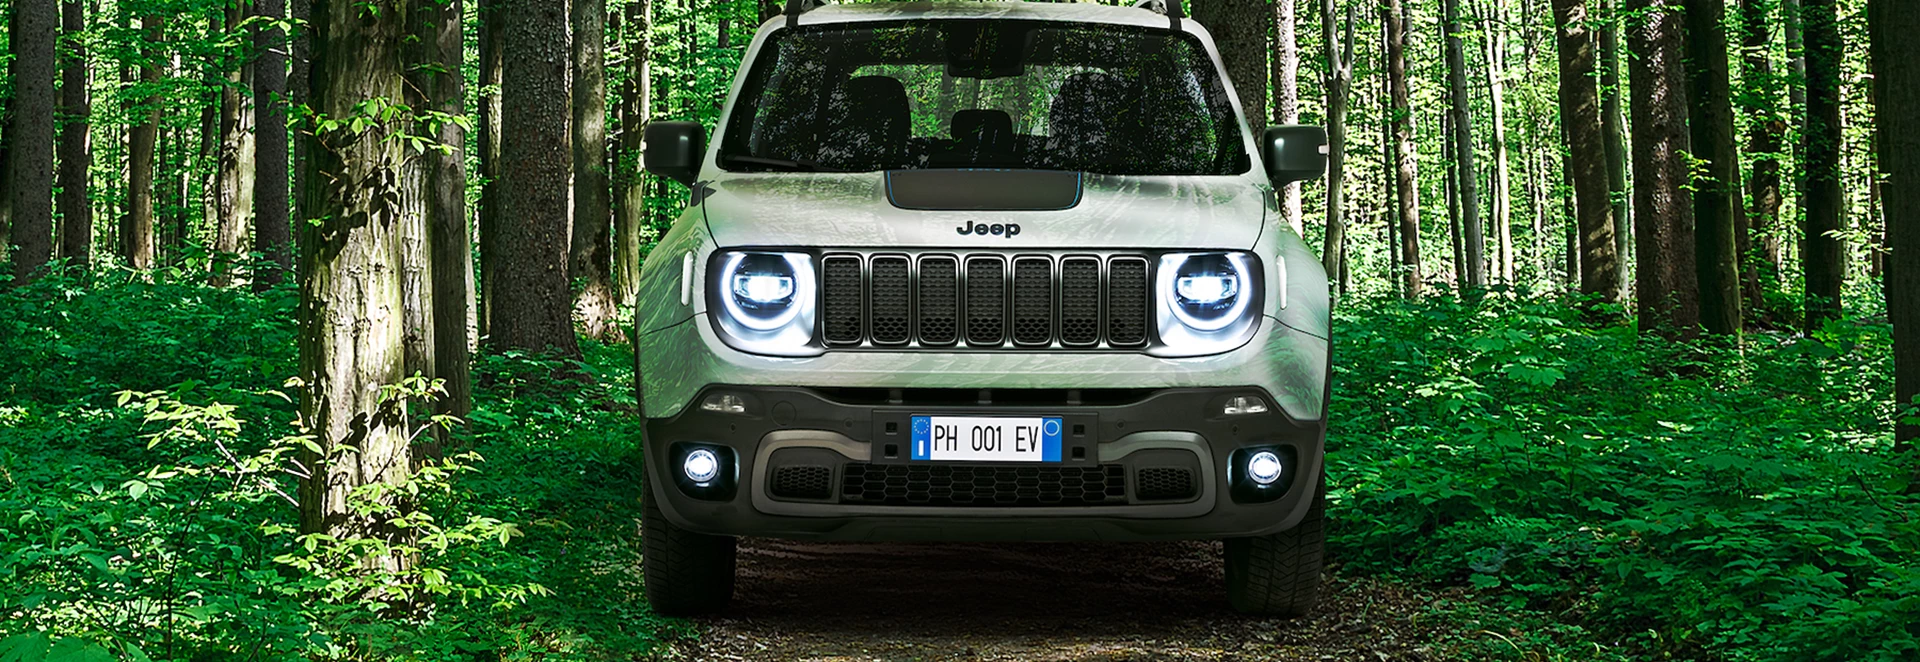 Jeep commits to new plug-in hybrid models as it moves to electrification